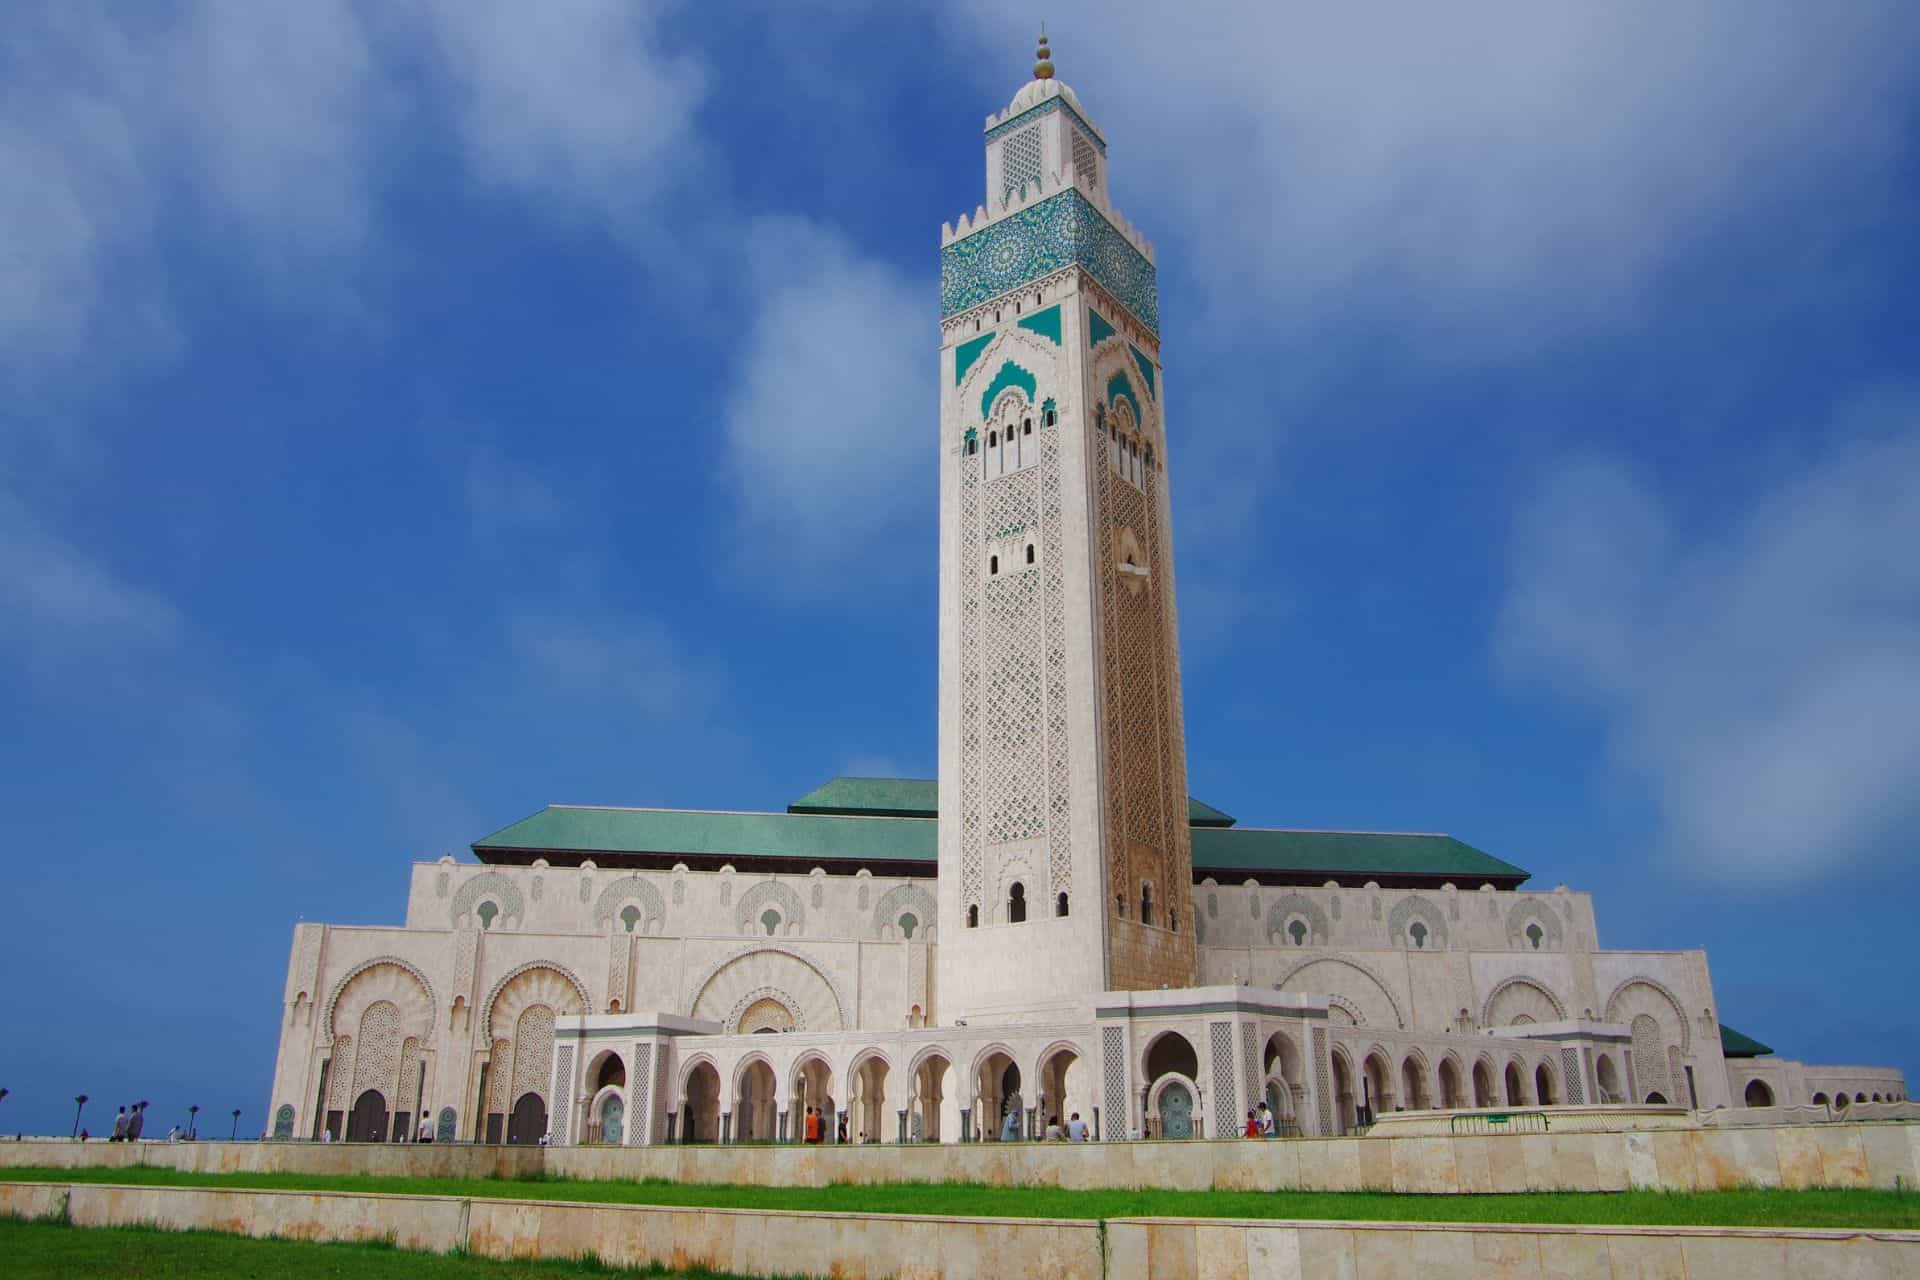 8 Days Morocco Private Cultural Tour from Marrakech